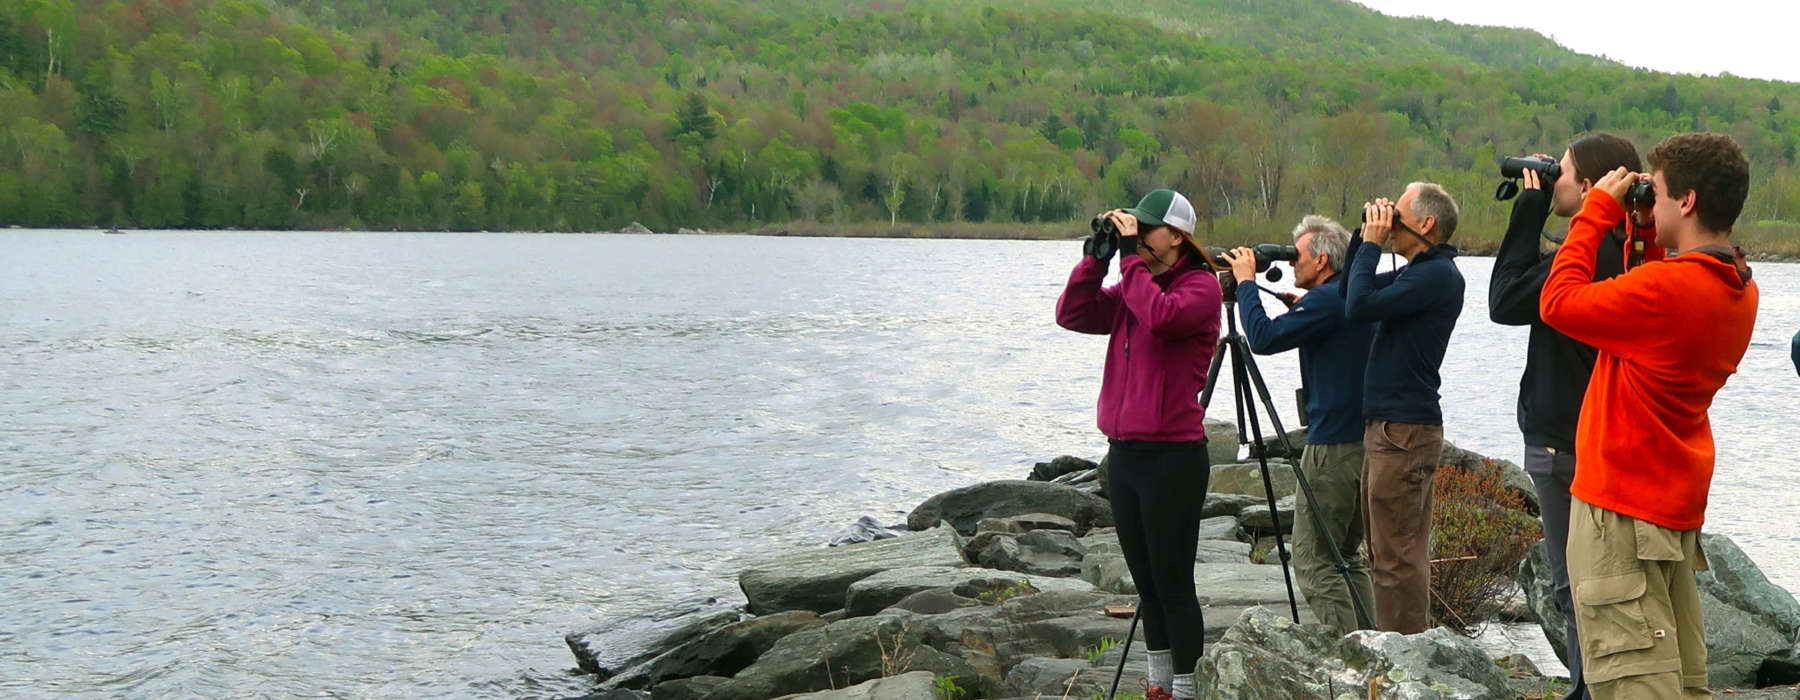 Birders looking through binoculars on the rocky shore of a lake in early spring.